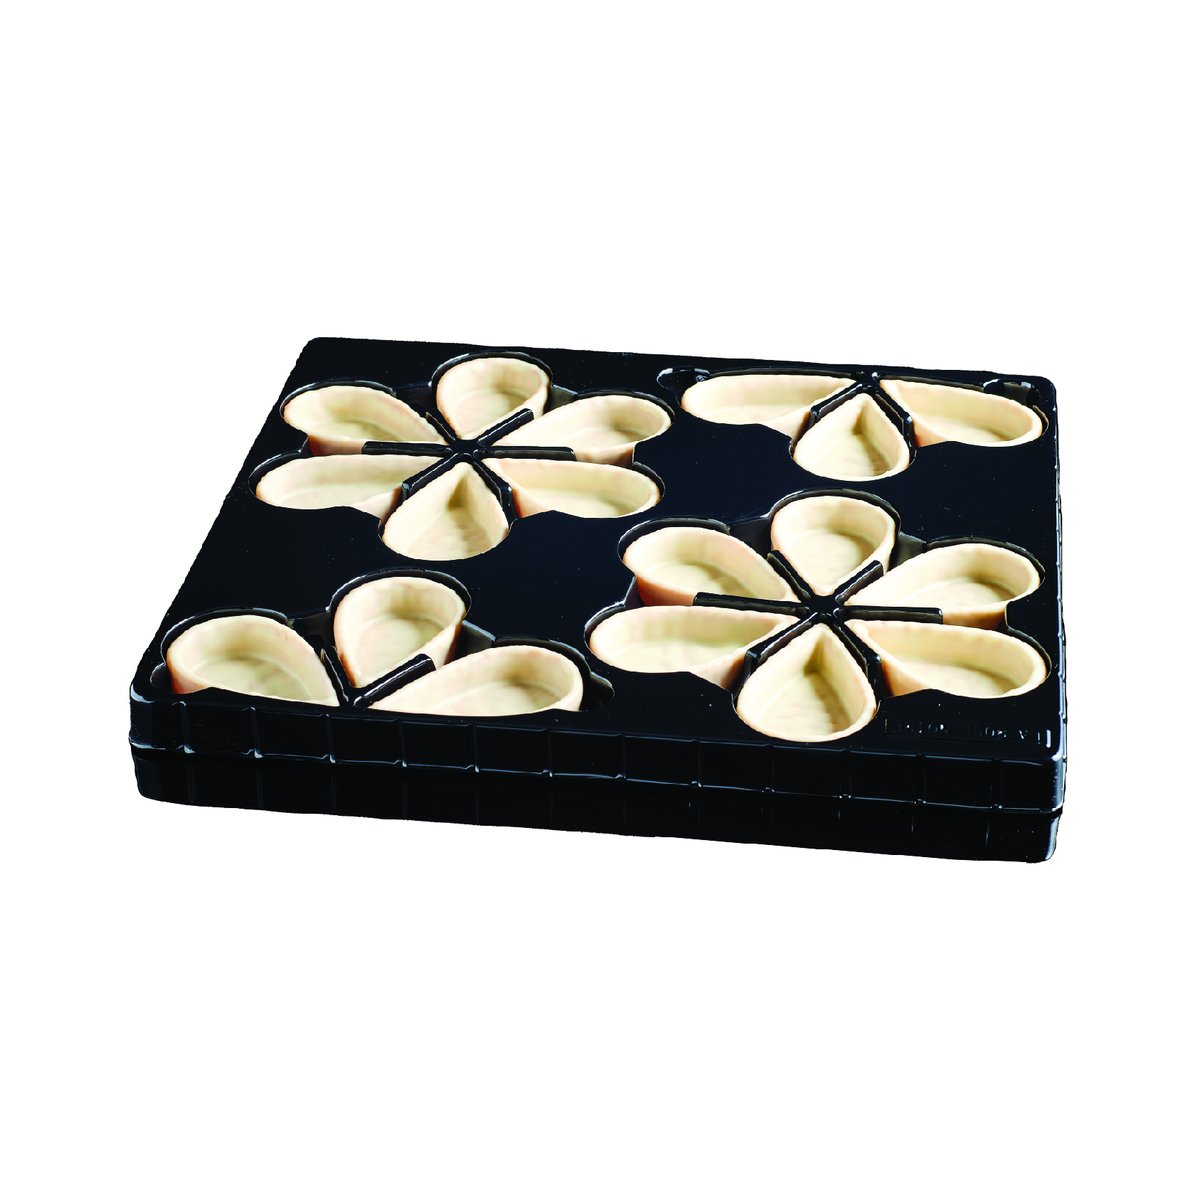 This Vanilla Petal Tart Shell comes in a crunchy texture and is well-coated with couverture on the inside. The base remains crisp and crunchy even when placed on frozen display racks. #larosenoire #couverture #petalstartshells #vanilla #milkchocolate #darkchocolate #innovation